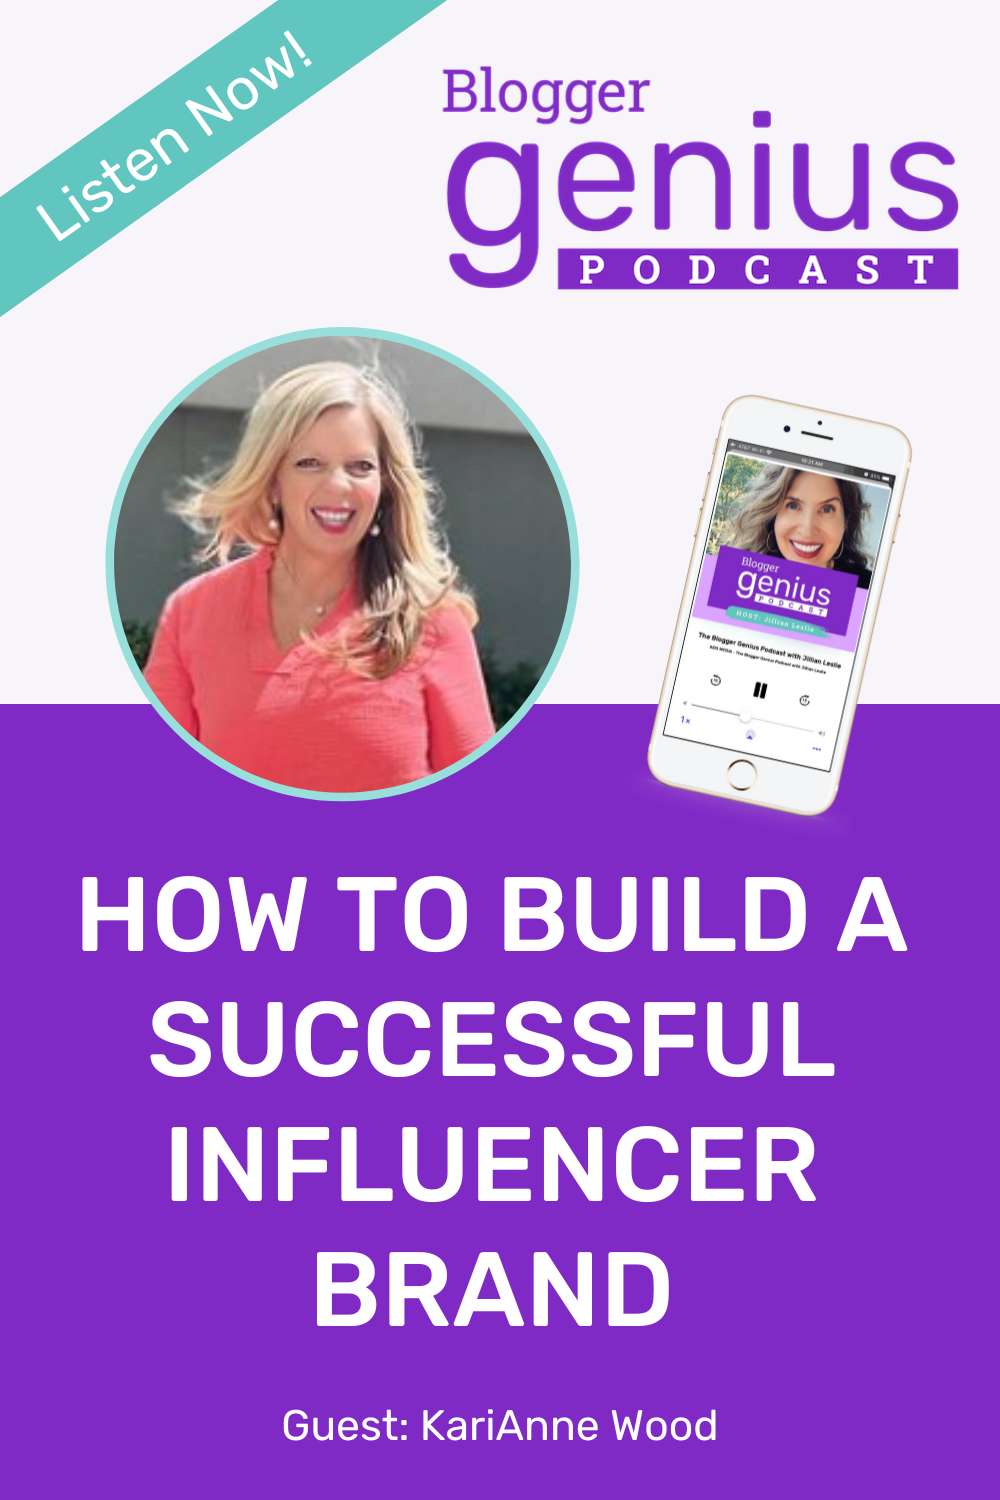 How to Build a Successful Influencer Brand | The Blogger Genius Podcast with Jillian Leslie